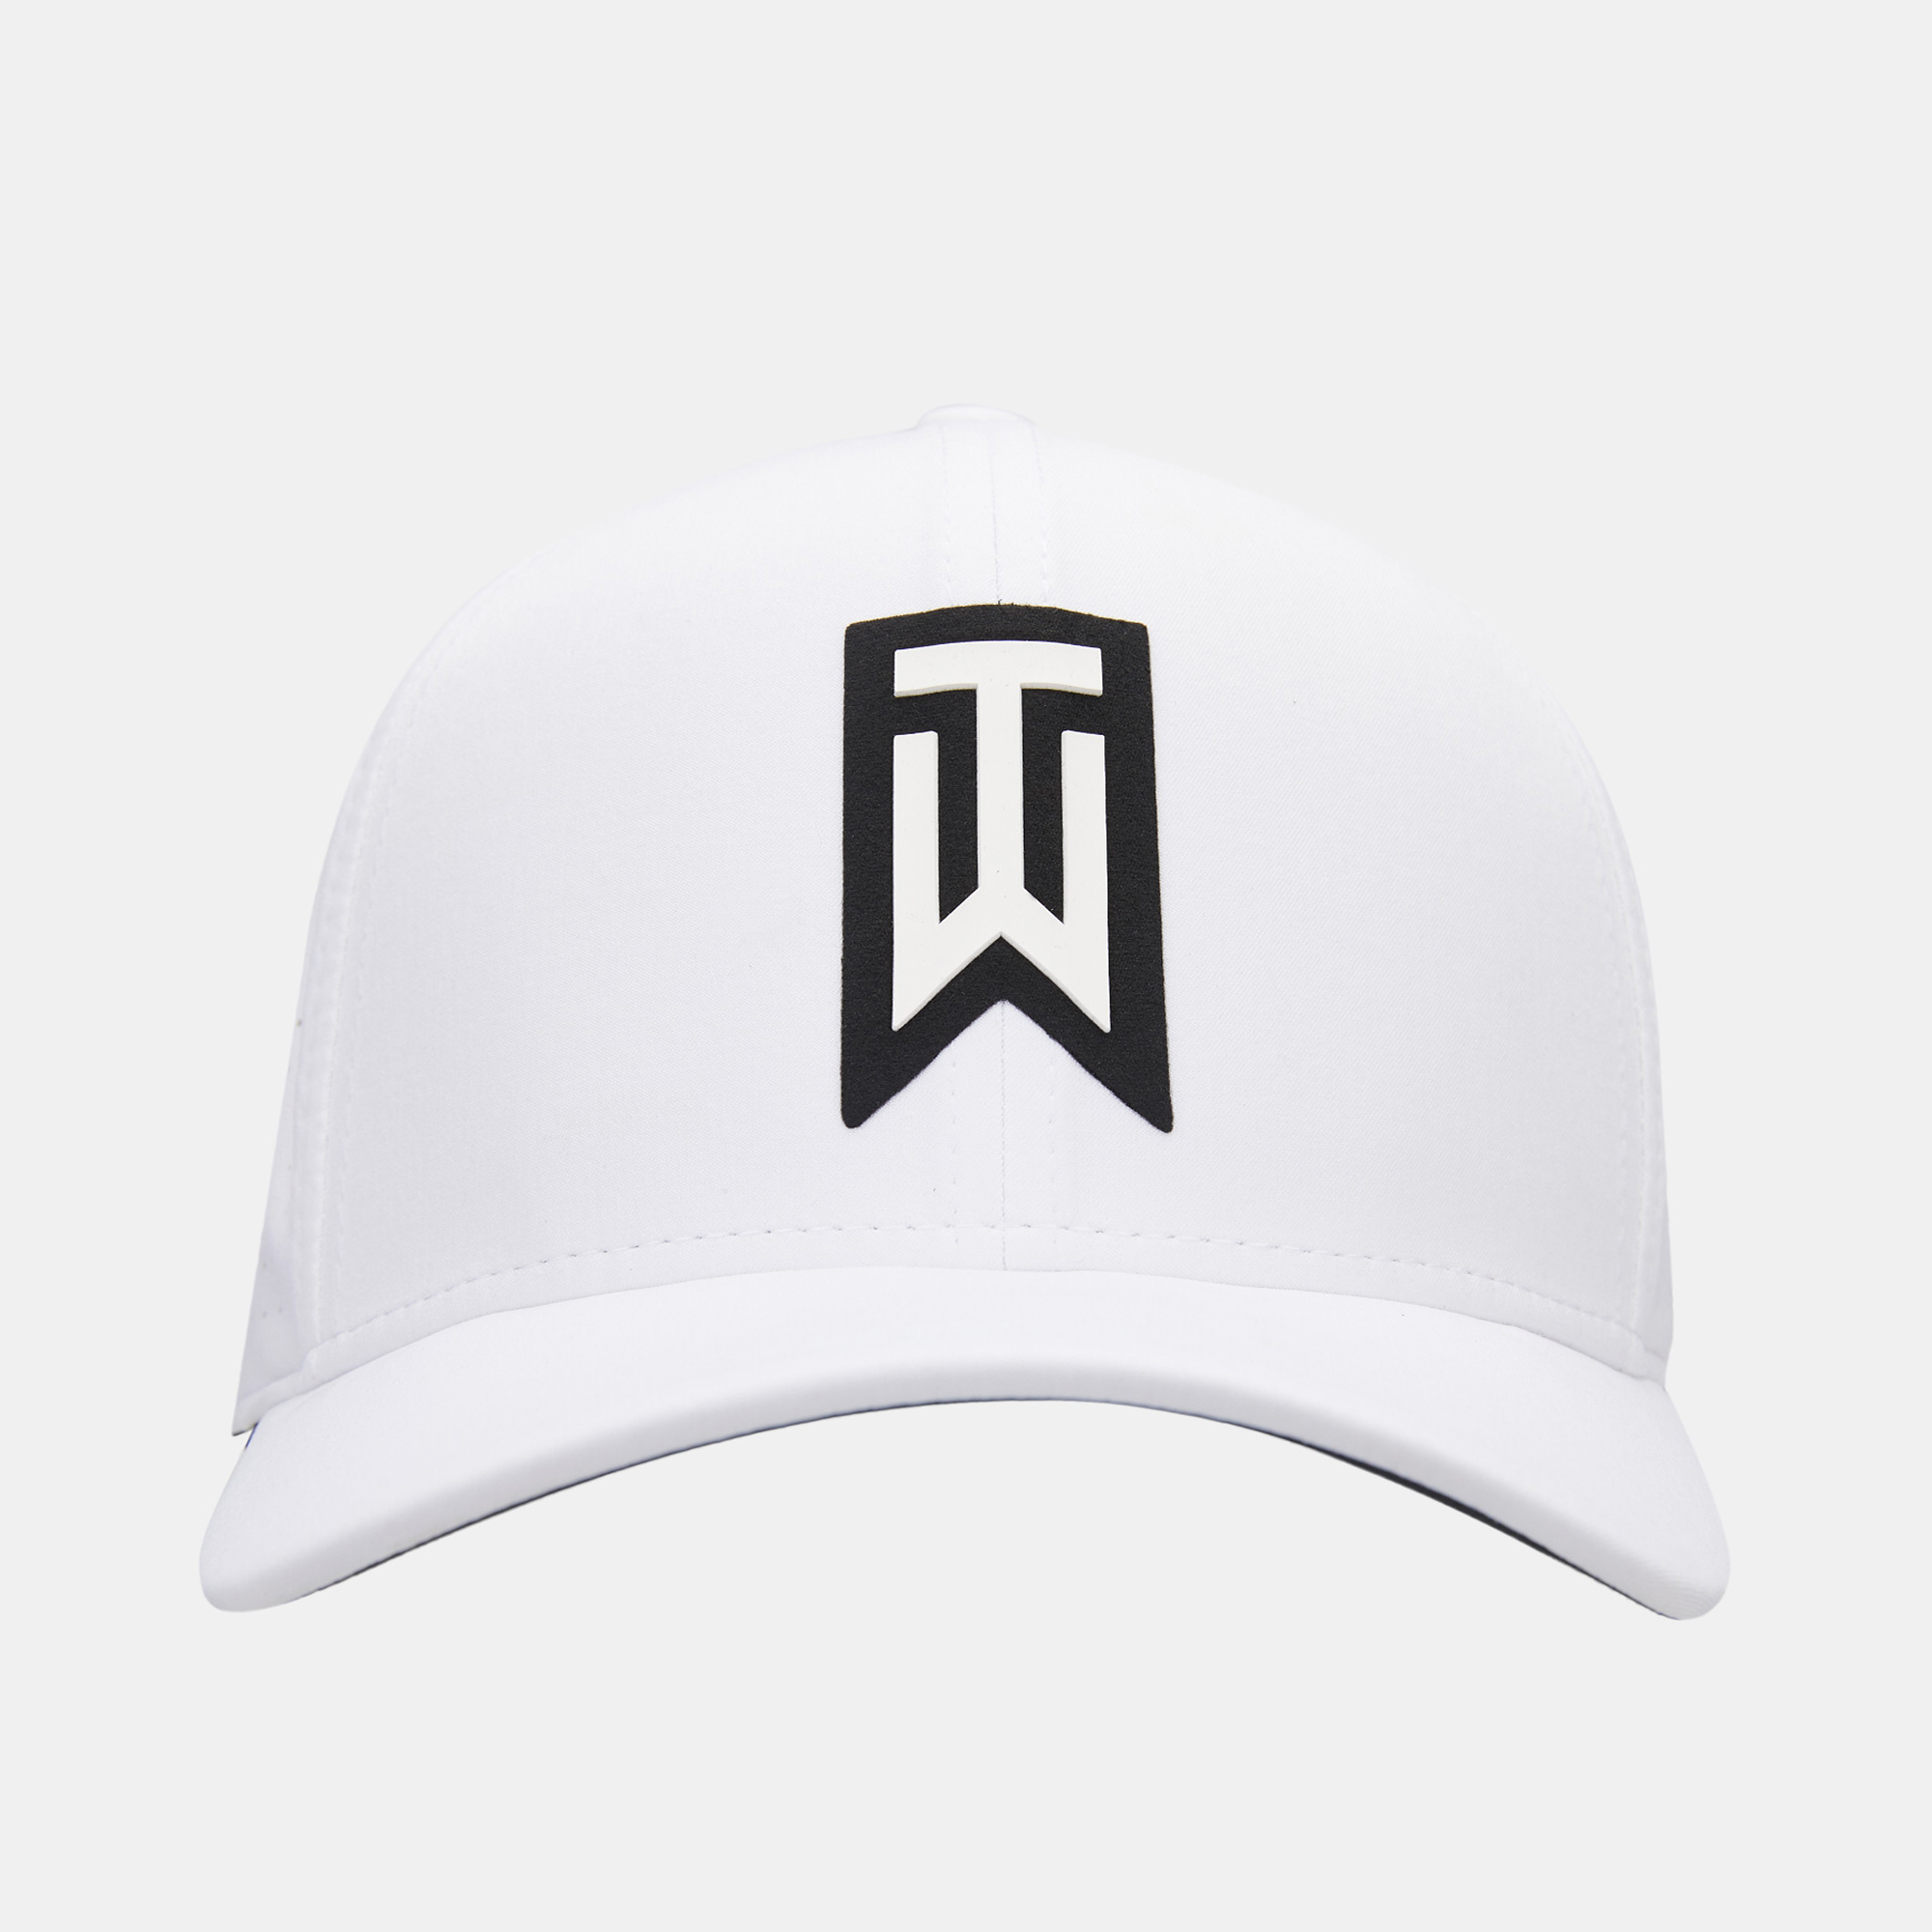 tw aerobill classic 99 fitted golf hat